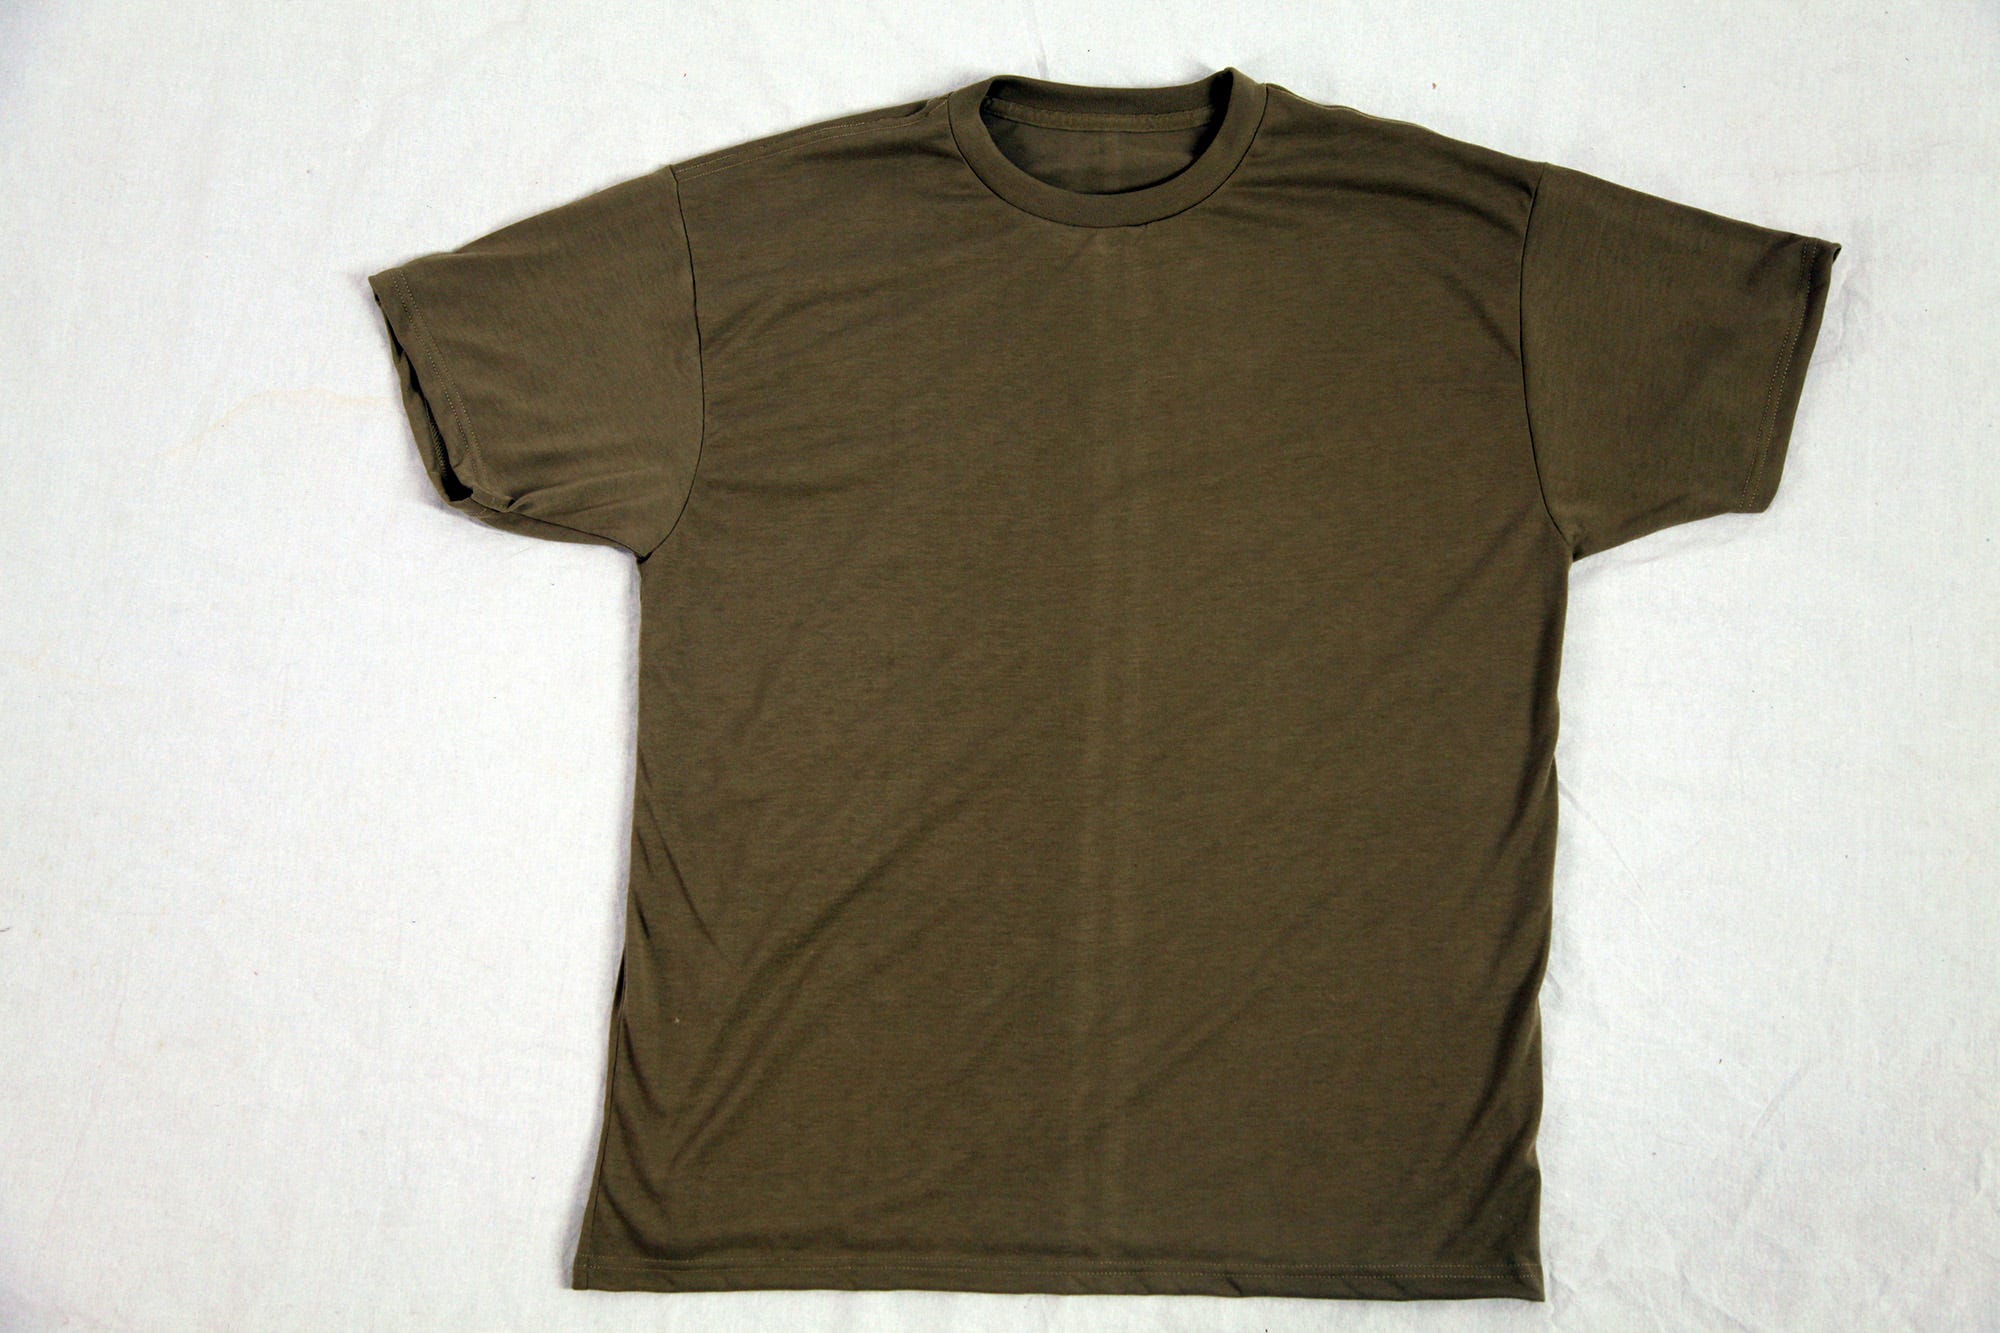 new army t shirt color